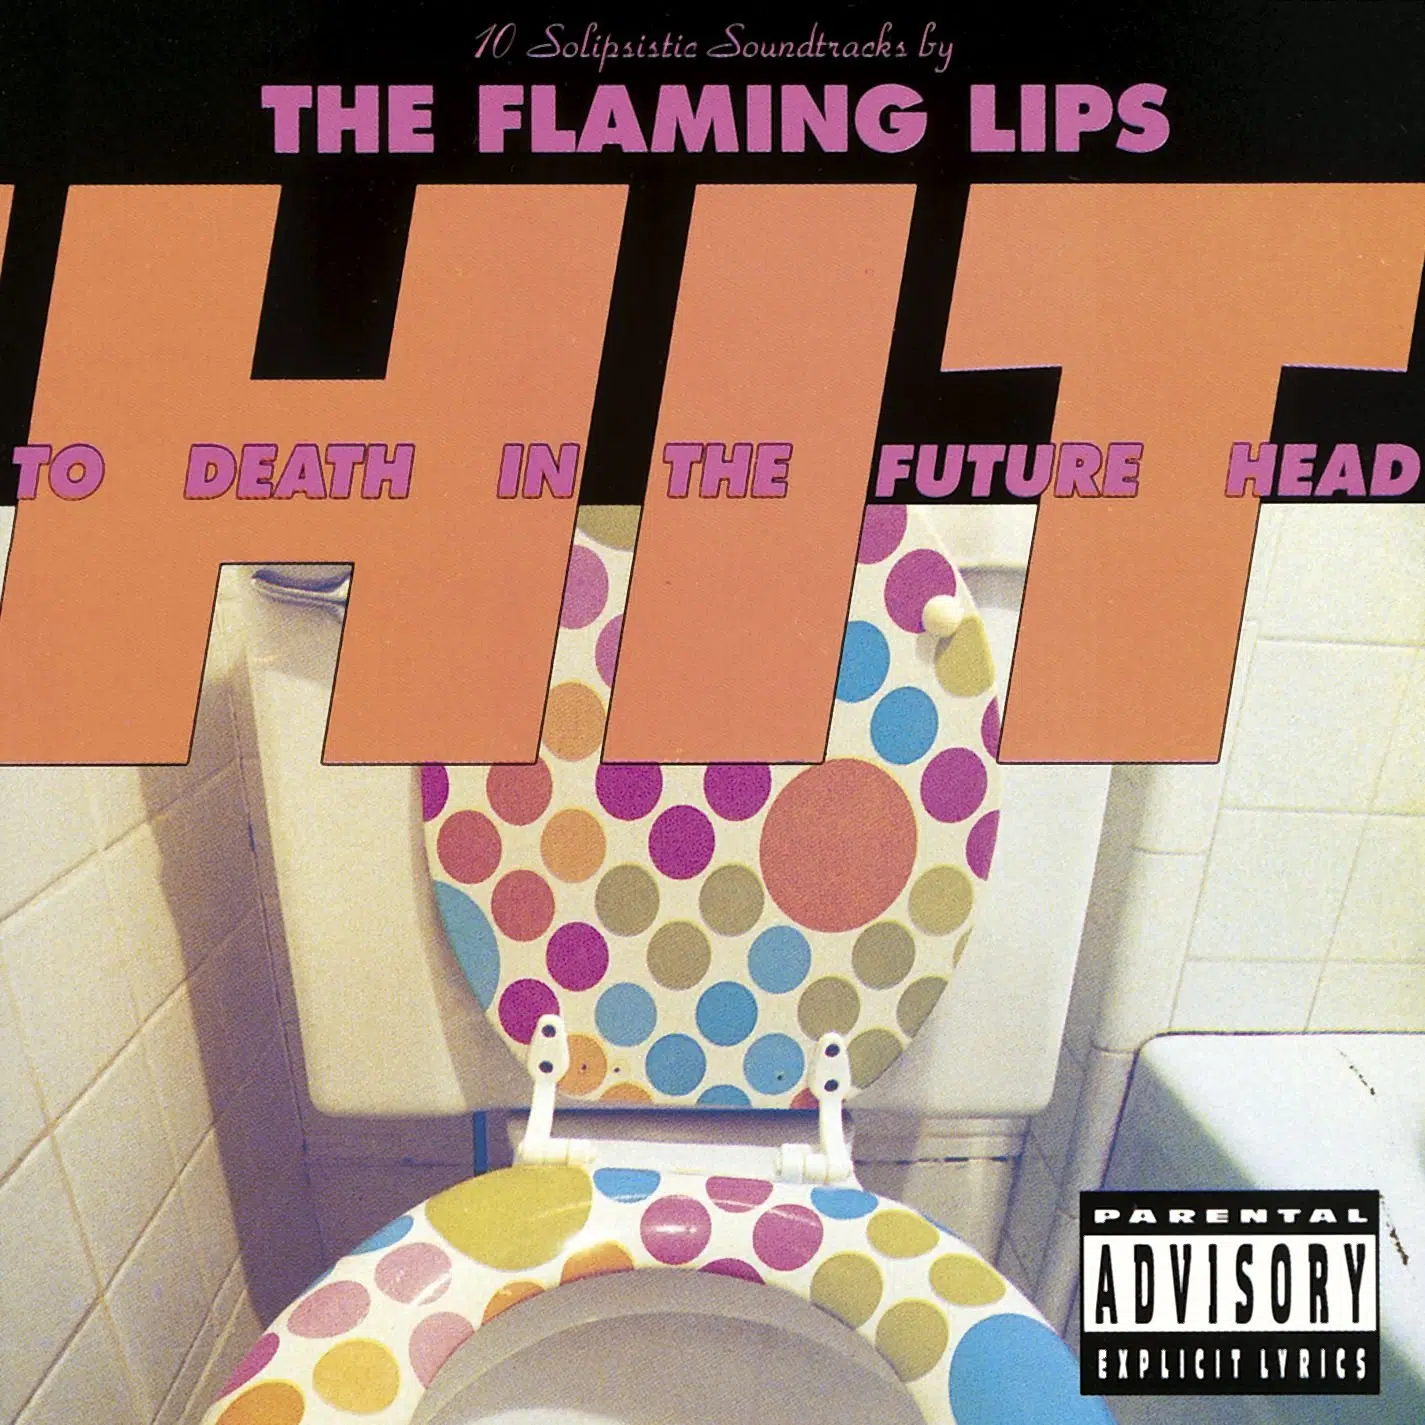 The Flaming Lips Hit to Death in the Future Head